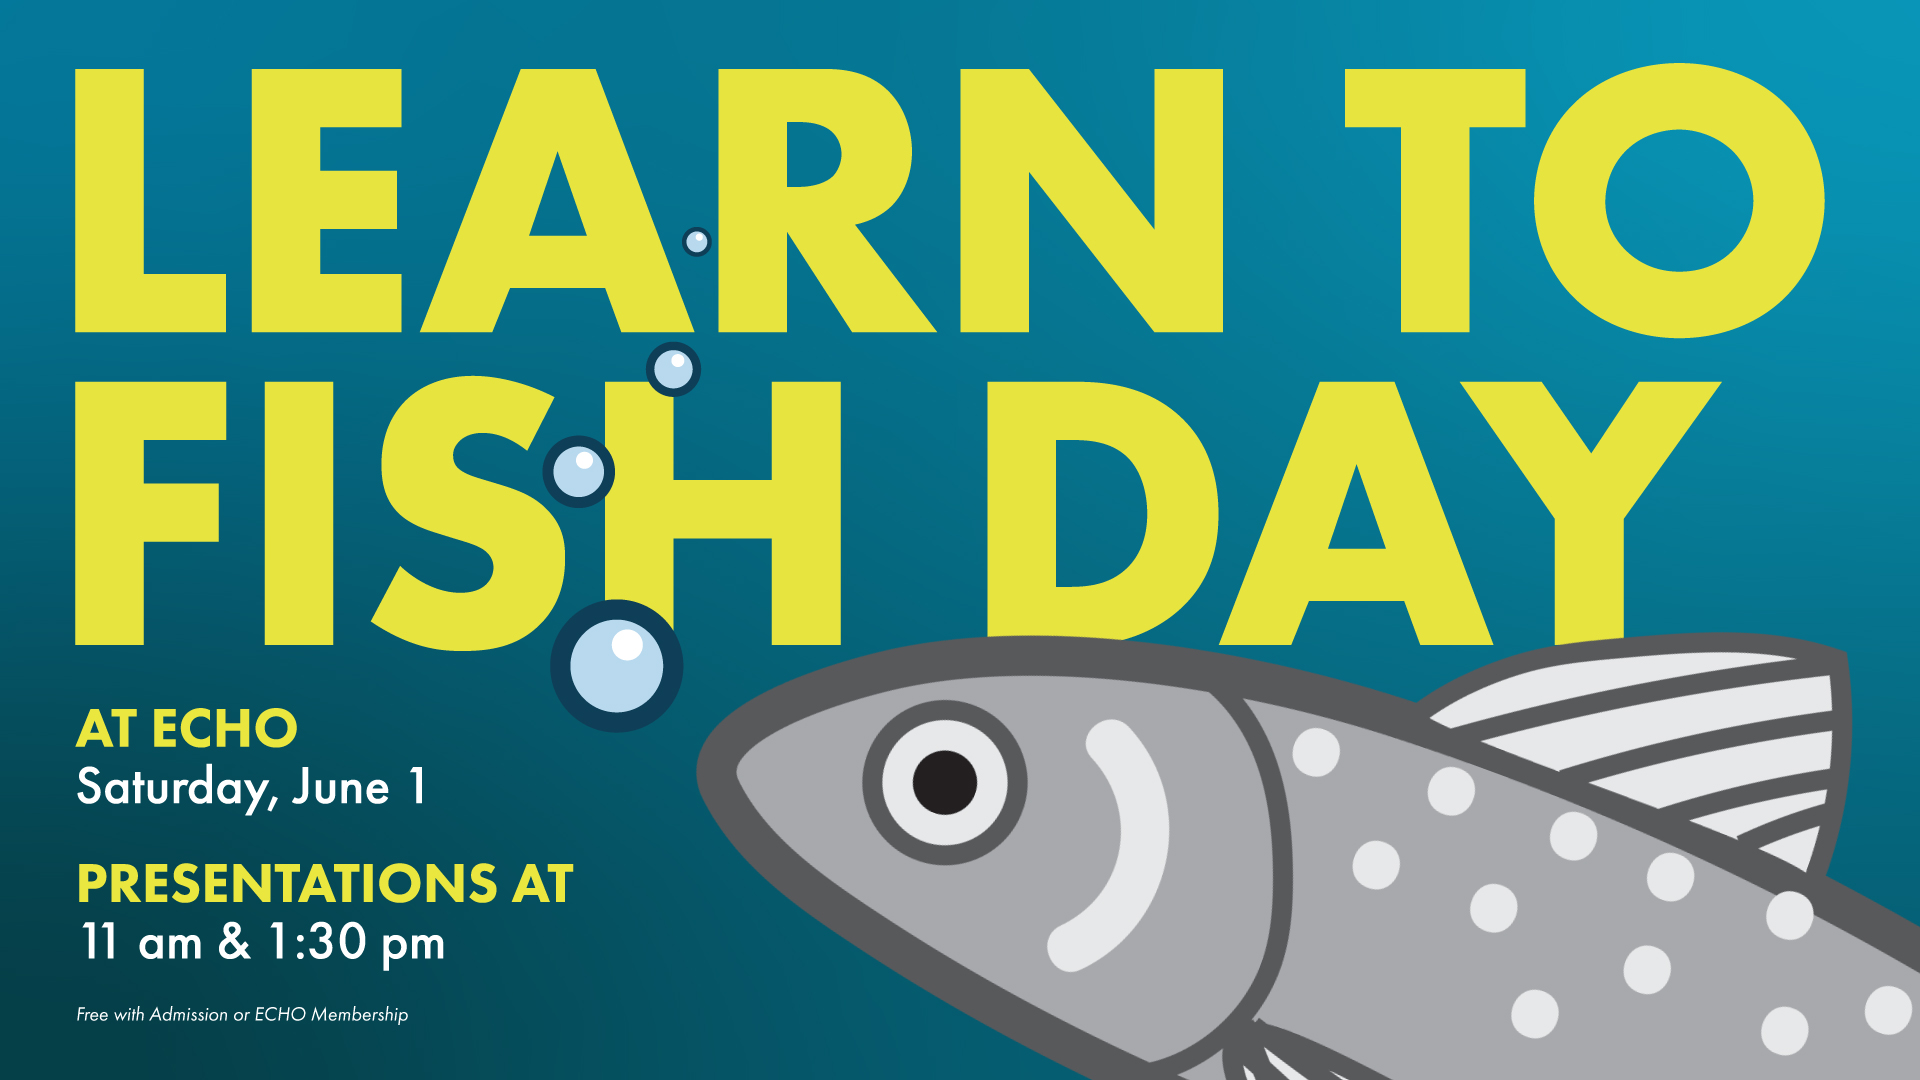 Teal-blue gradient with yellow text that reads "LEARN TO FISH DAY. AT ECHO Saturday, June 1. Presentations at 11am and 1:30pm." An illustration of a gray fish and bubbles in the foreground partially obscure the text.